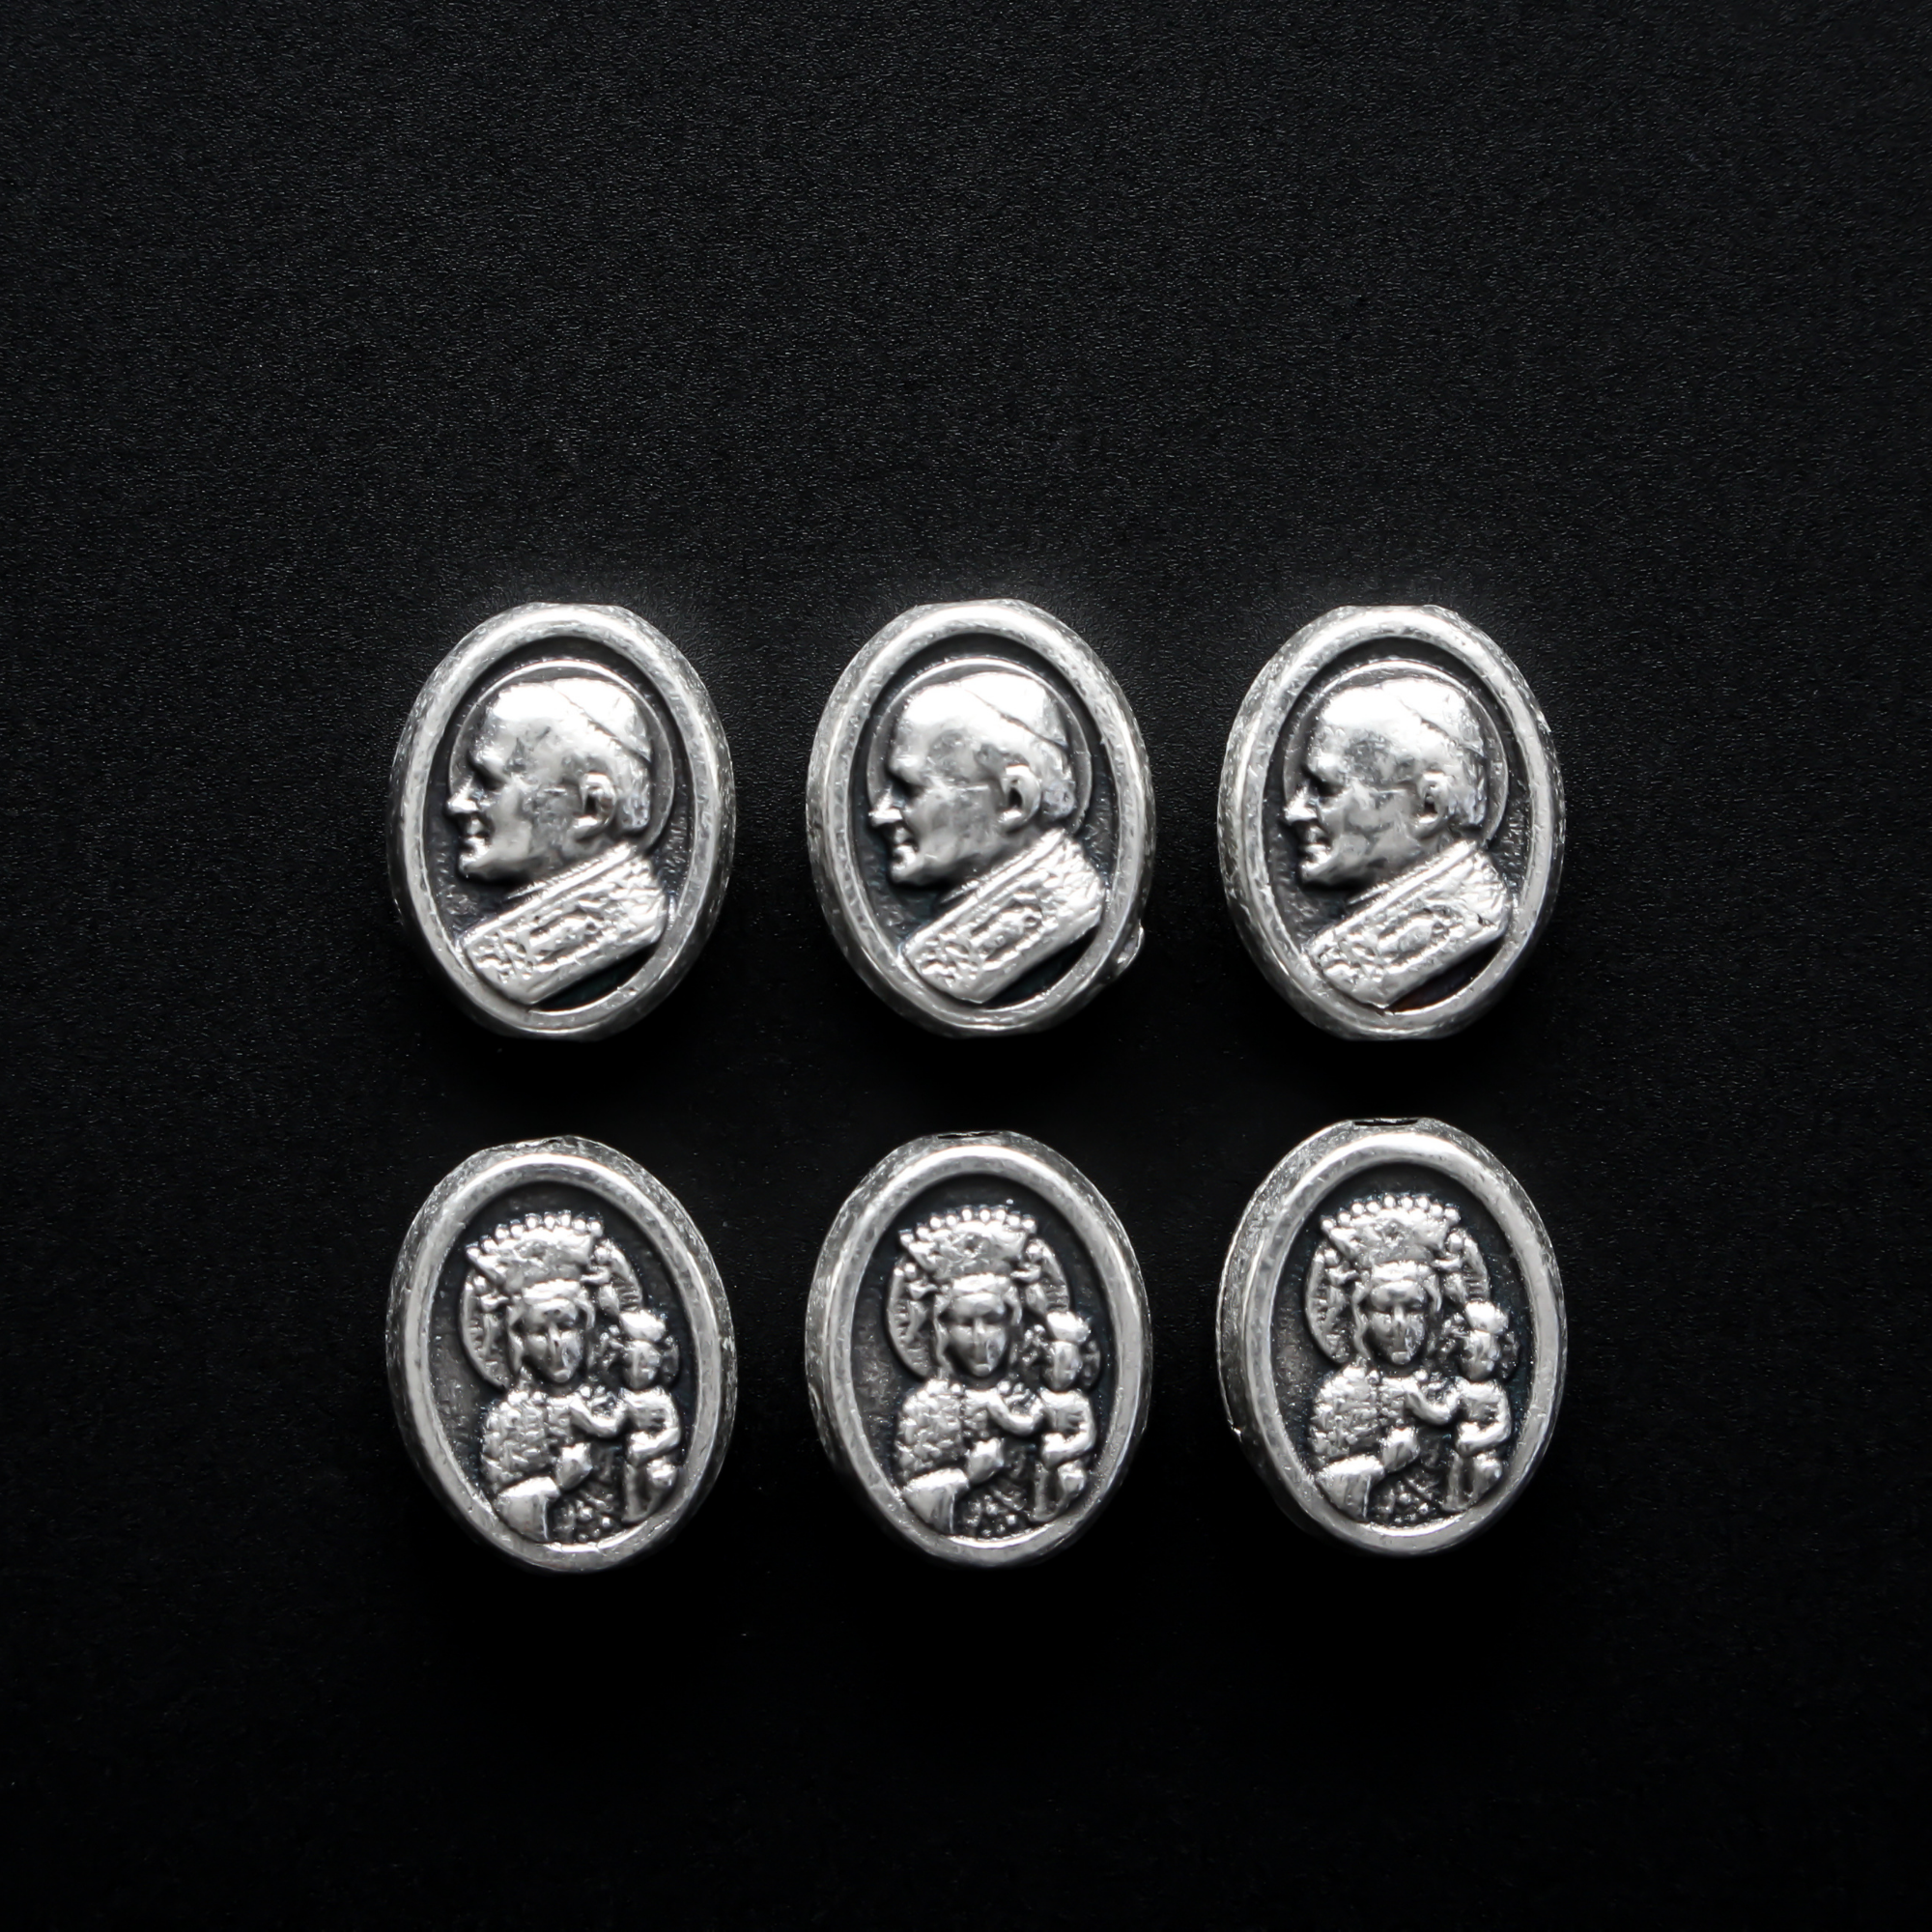 small die cast metal beads that depict Our Lady of Czestochowa on one side and Pope John Paul II on the other side.